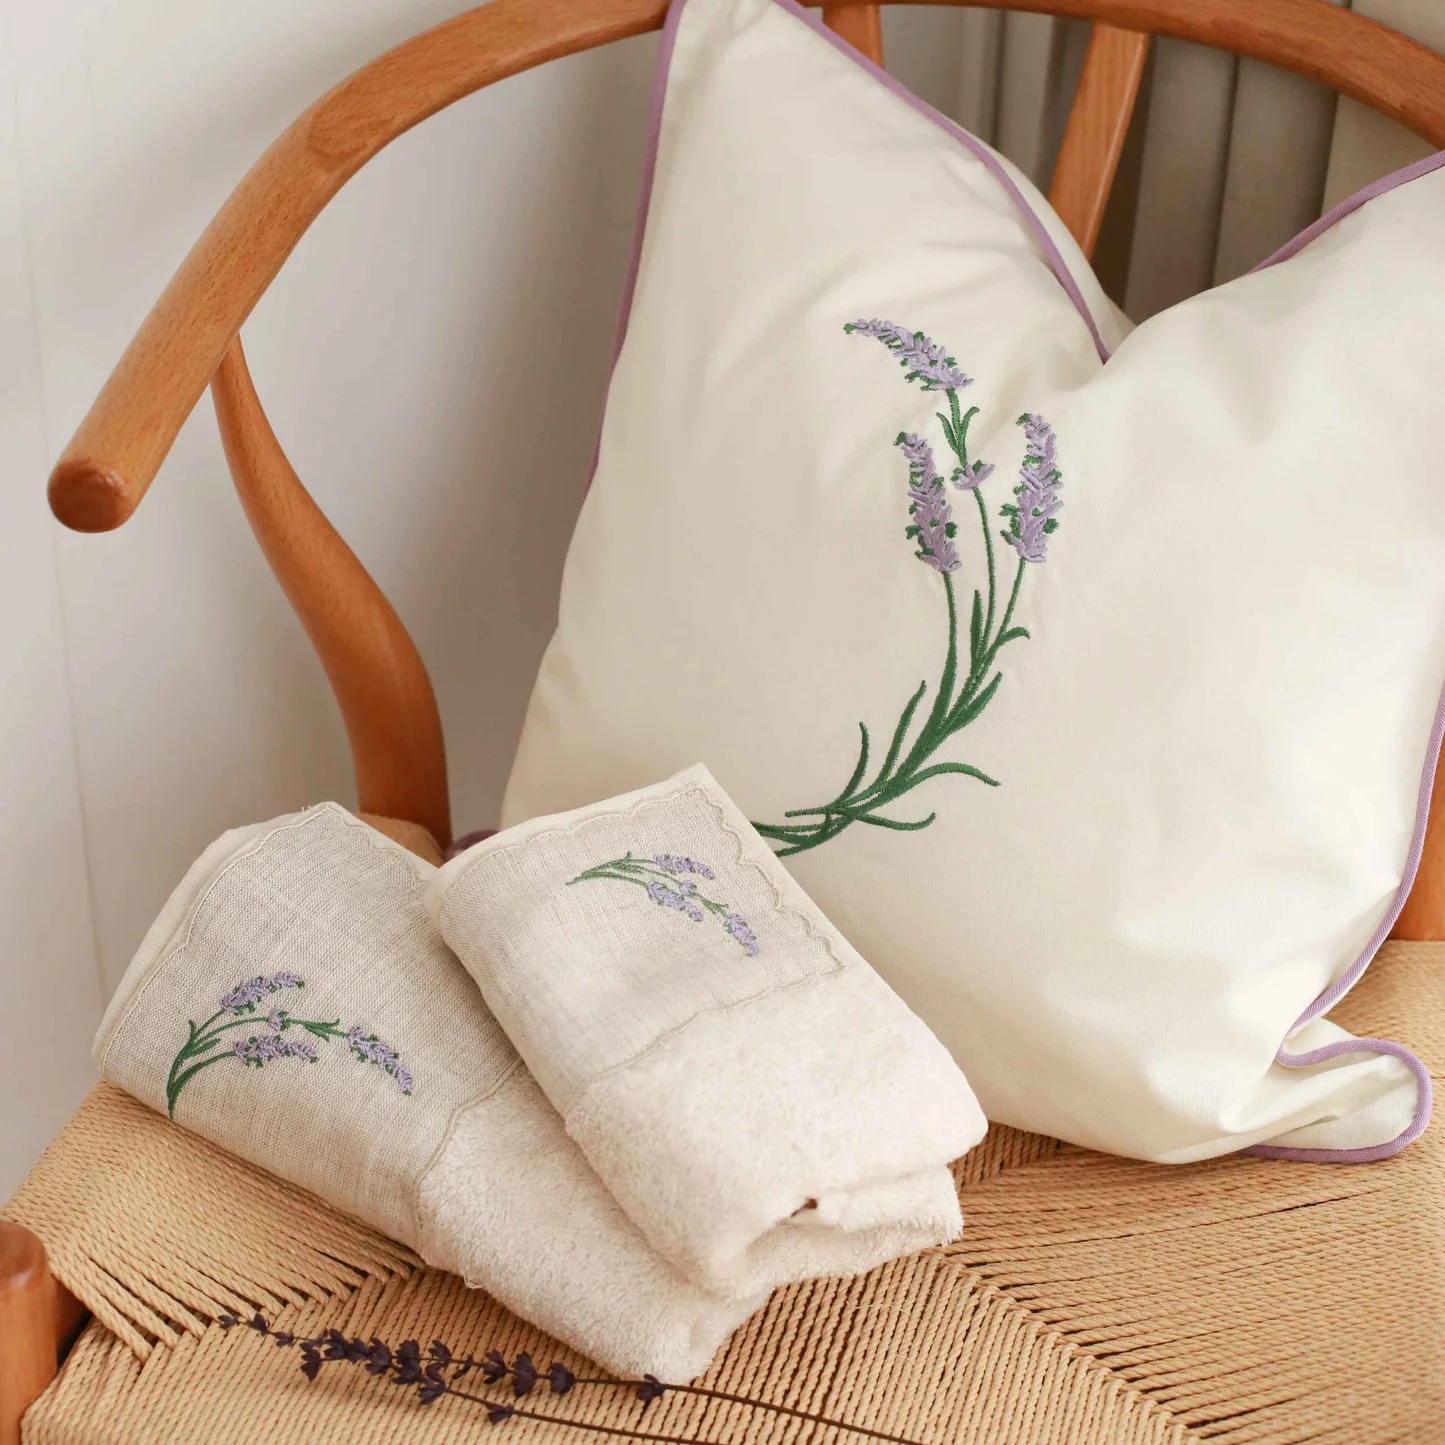 Embroidered Hand Towels or Pillowcases - birthday gift ideas for best friend female diy